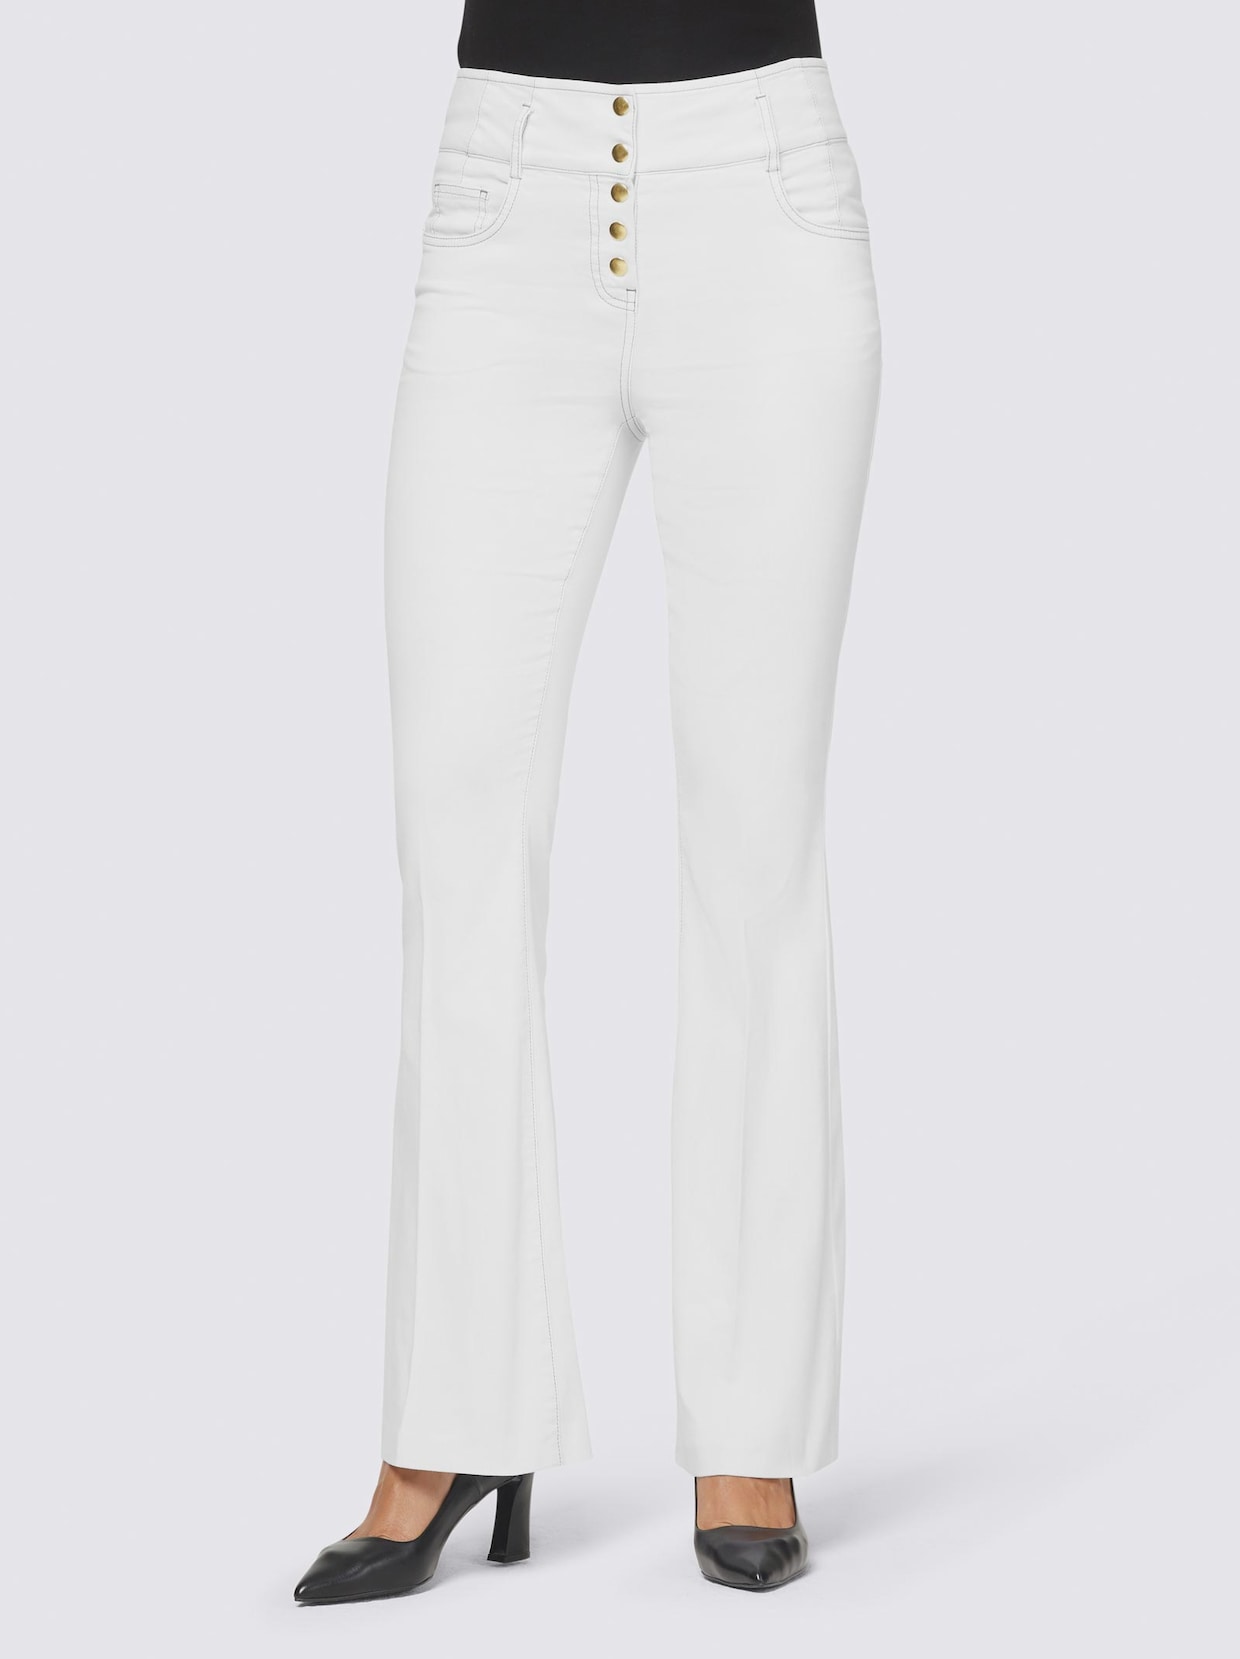 Ashley Brooke Push-up-Jeans - weiss